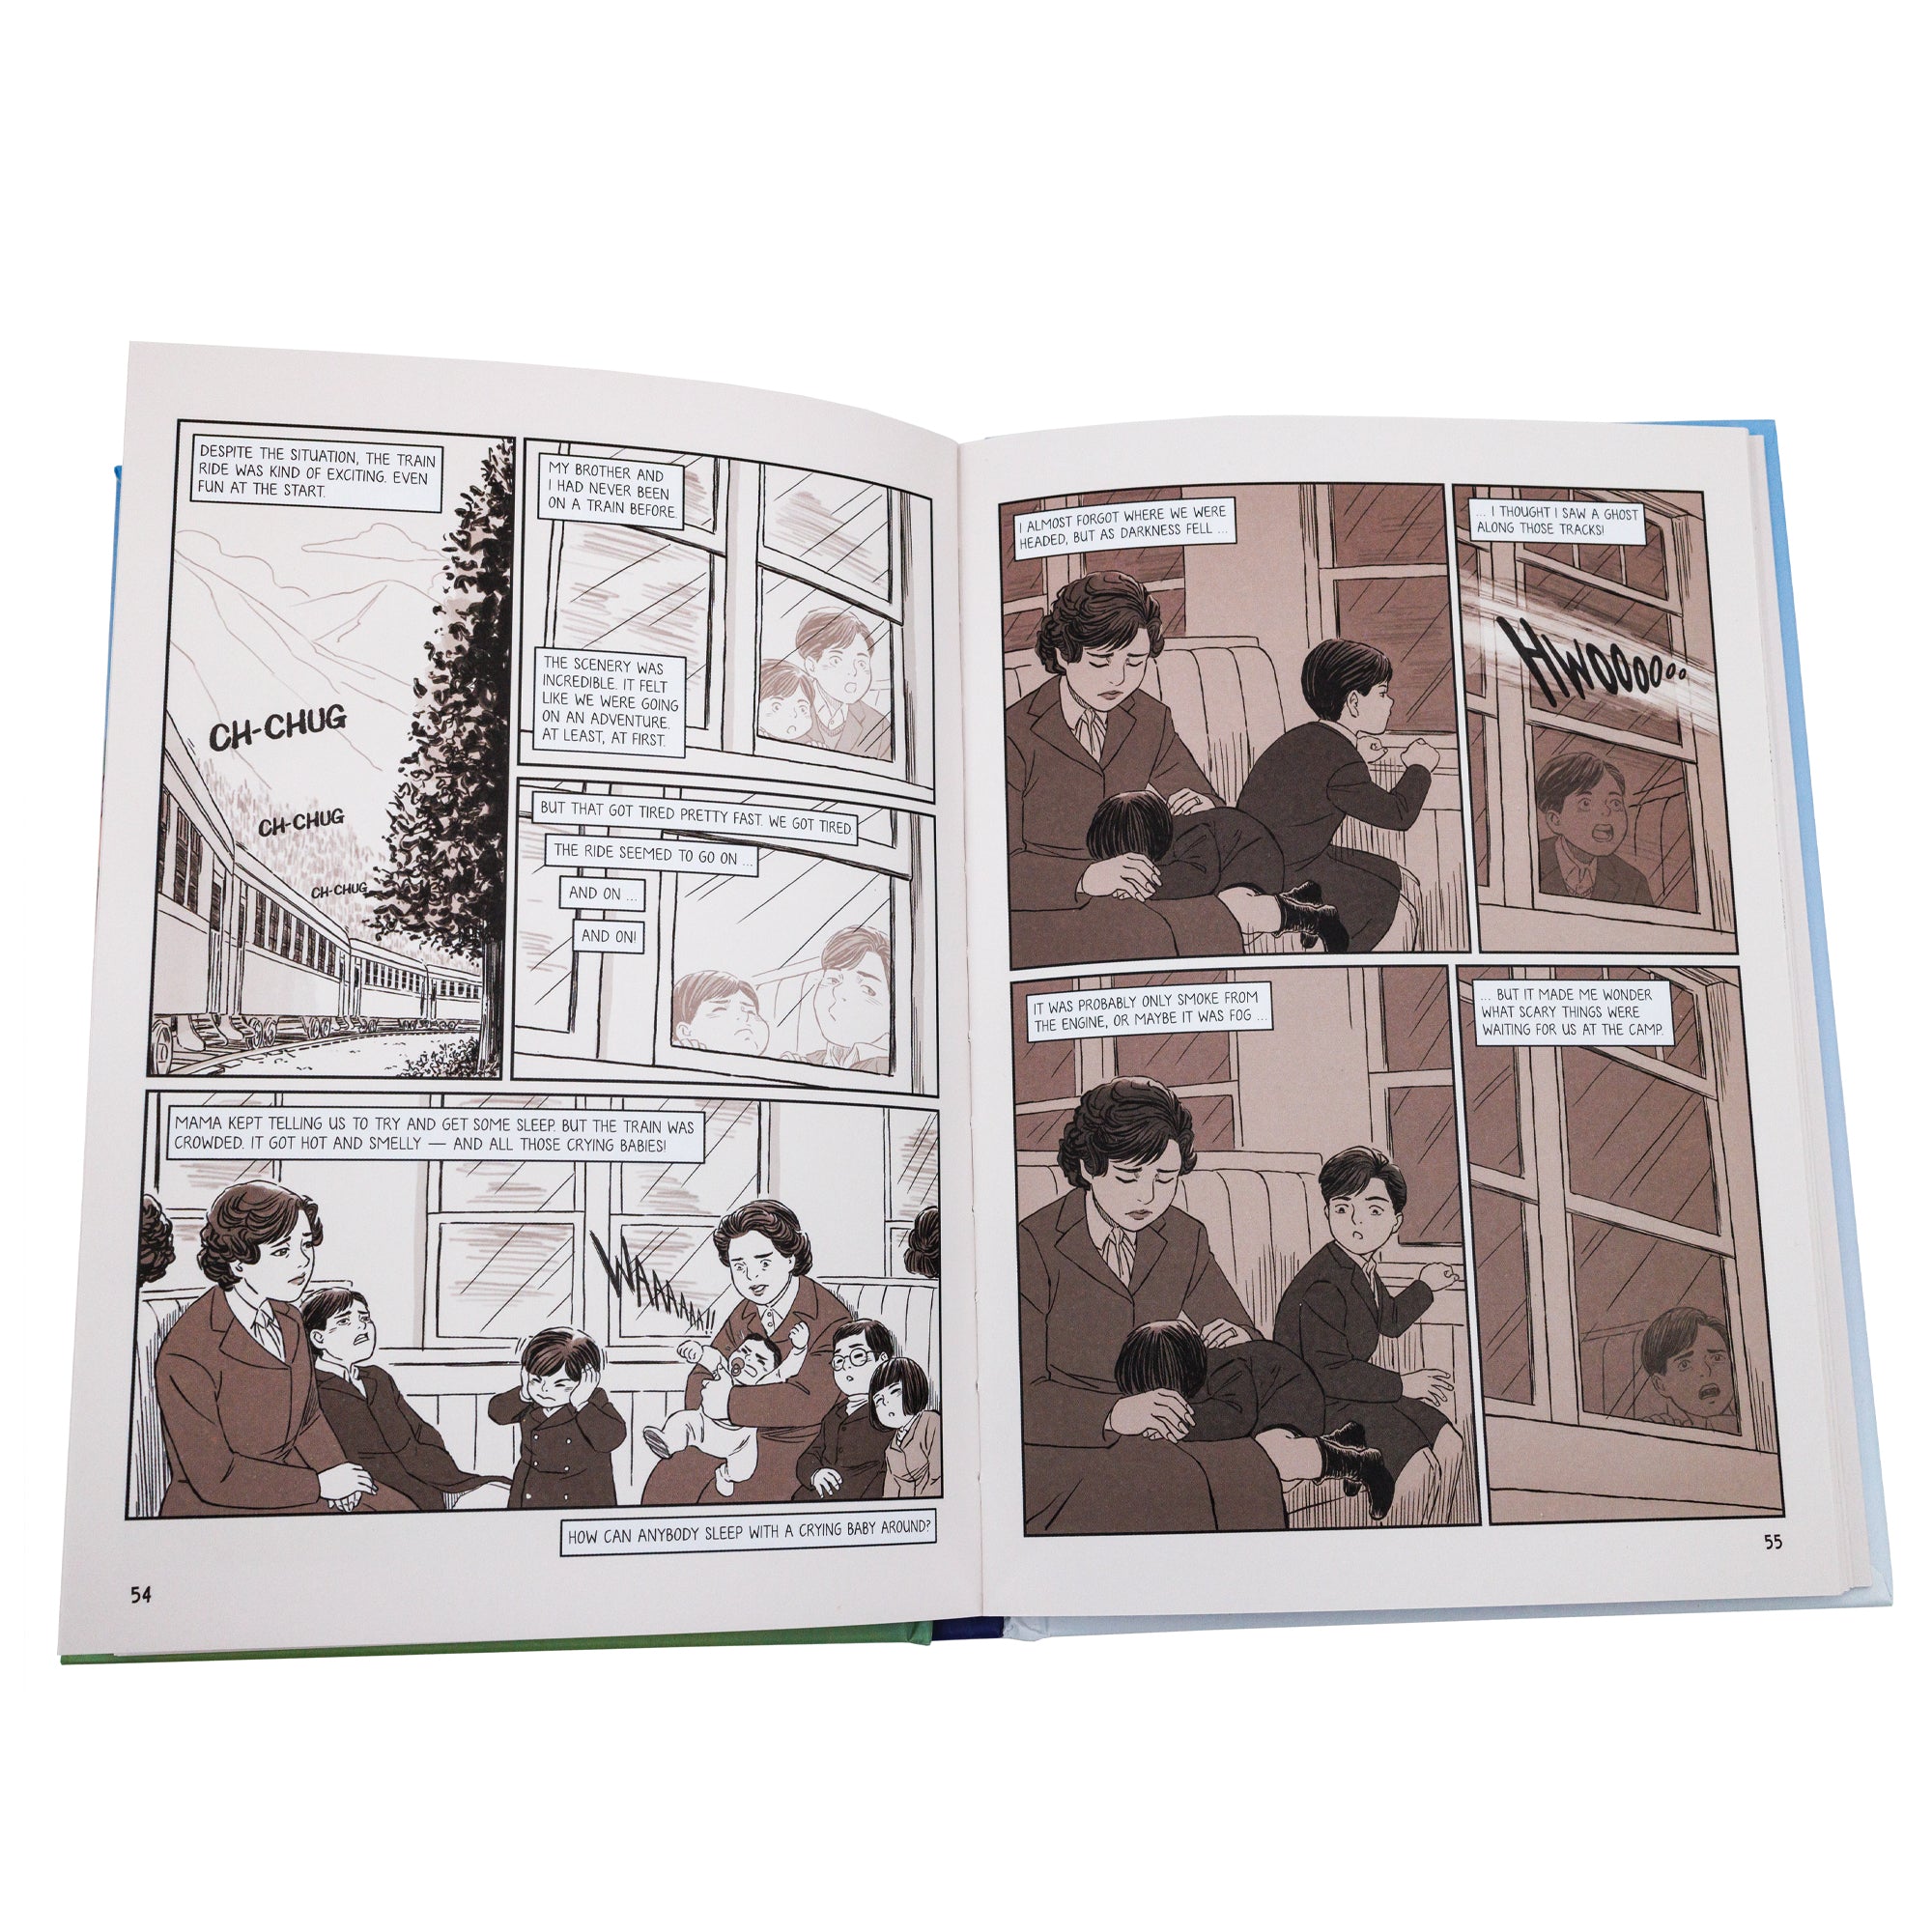 Stealing Home book open to show inside pages. The pages are in a comic book format. The part of the story on the pages shows a mother with her 2 boys on a train. The boys were excited at first, but the crowdedness and long distance to the camp was getting more difficult.